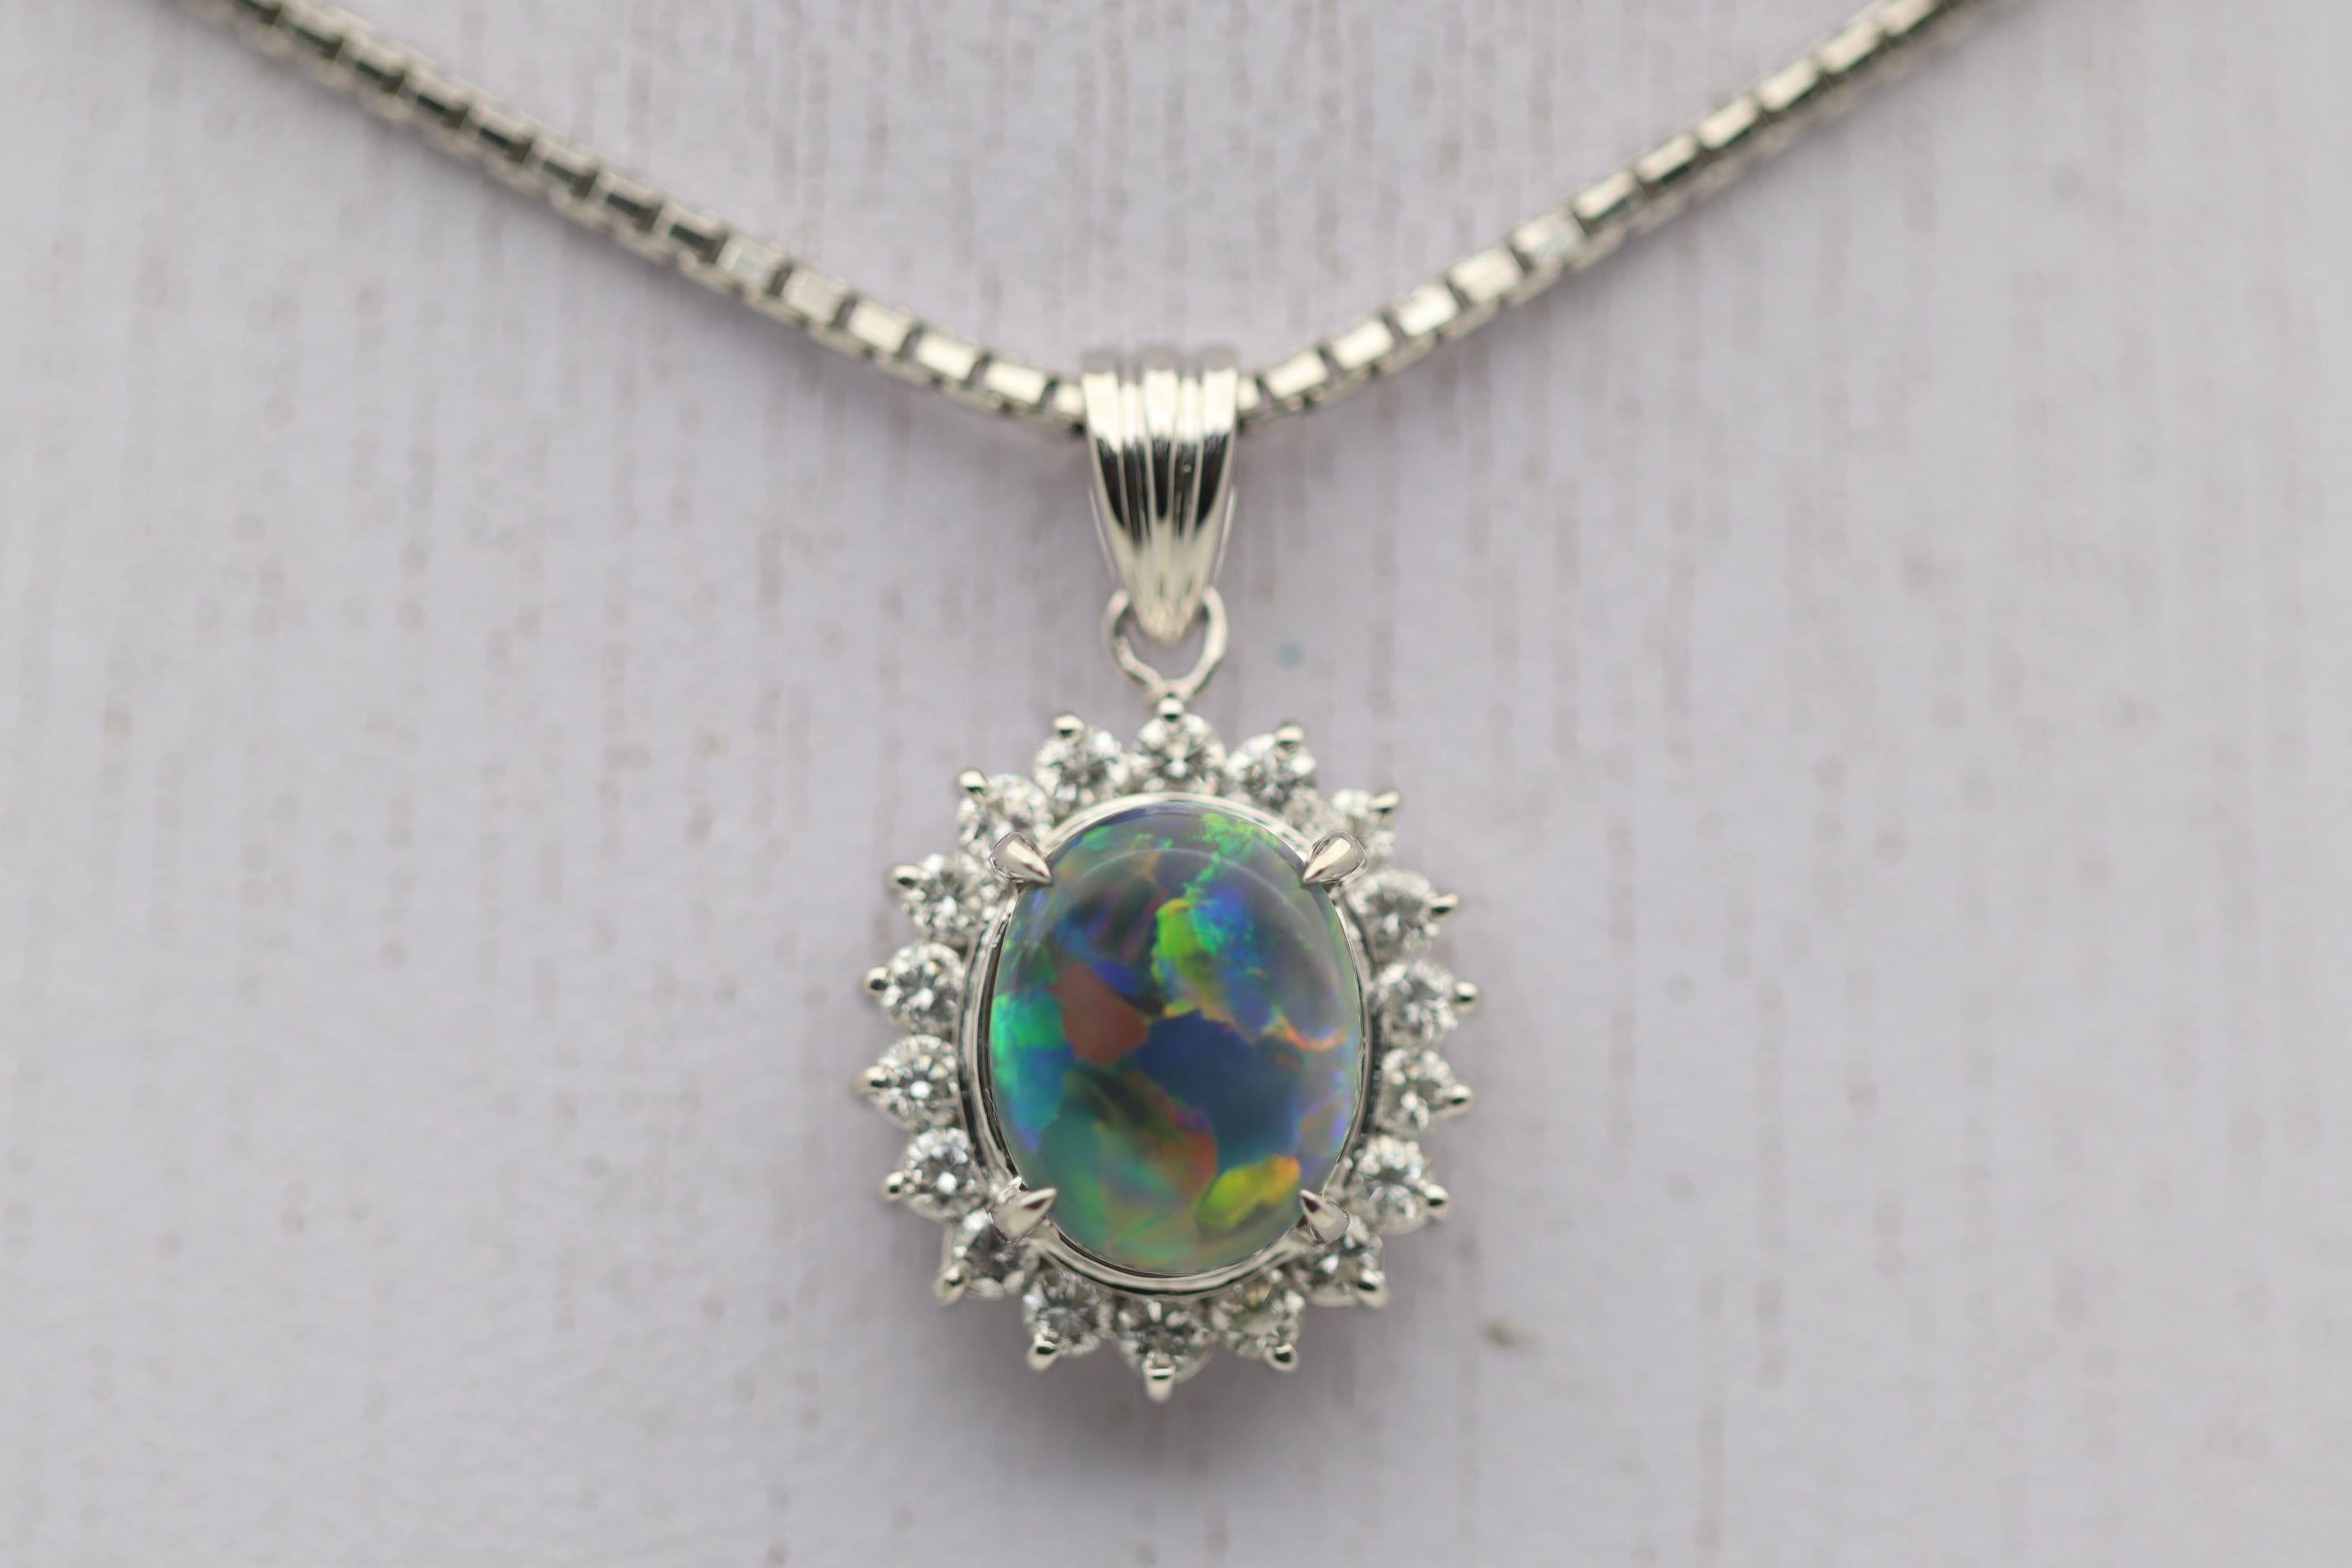 A classic and gemmy Australian black opal weighing 2.85 carats takes center stage of this platinum pendant. It has amazing play-of-color as bright intense flashes of red, orange, yellow, green and blue dance across the stone. It is surrounded by a